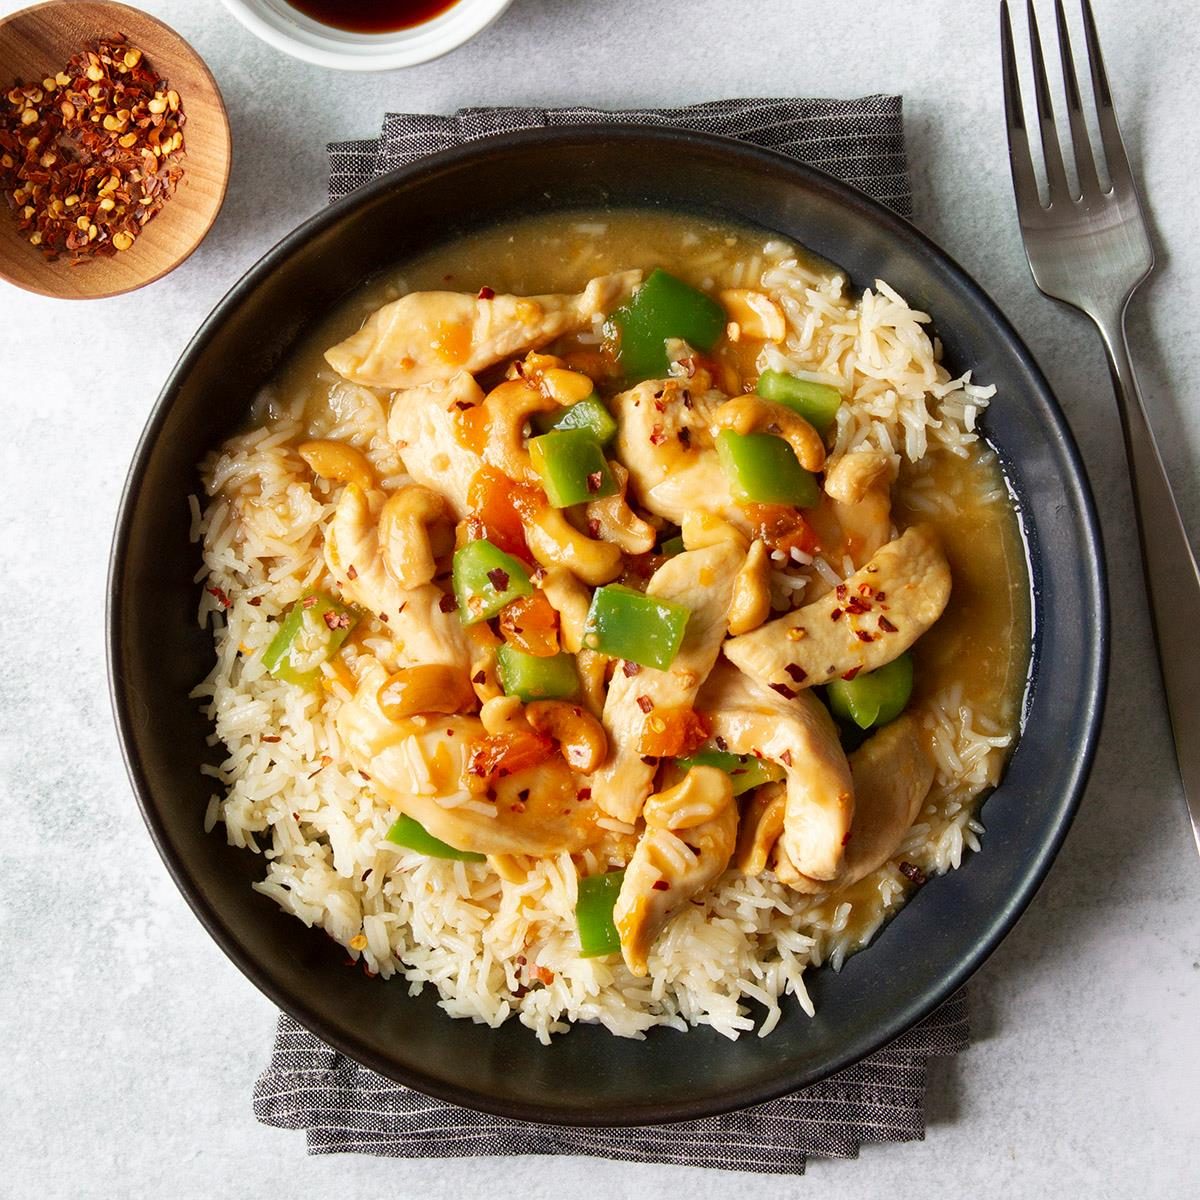 https://www.tasteofhome.com/wp-content/uploads/2018/01/Quick-Apricot-Chicken_EXPS_FT20_31475_F_0424_1_home-19.jpg